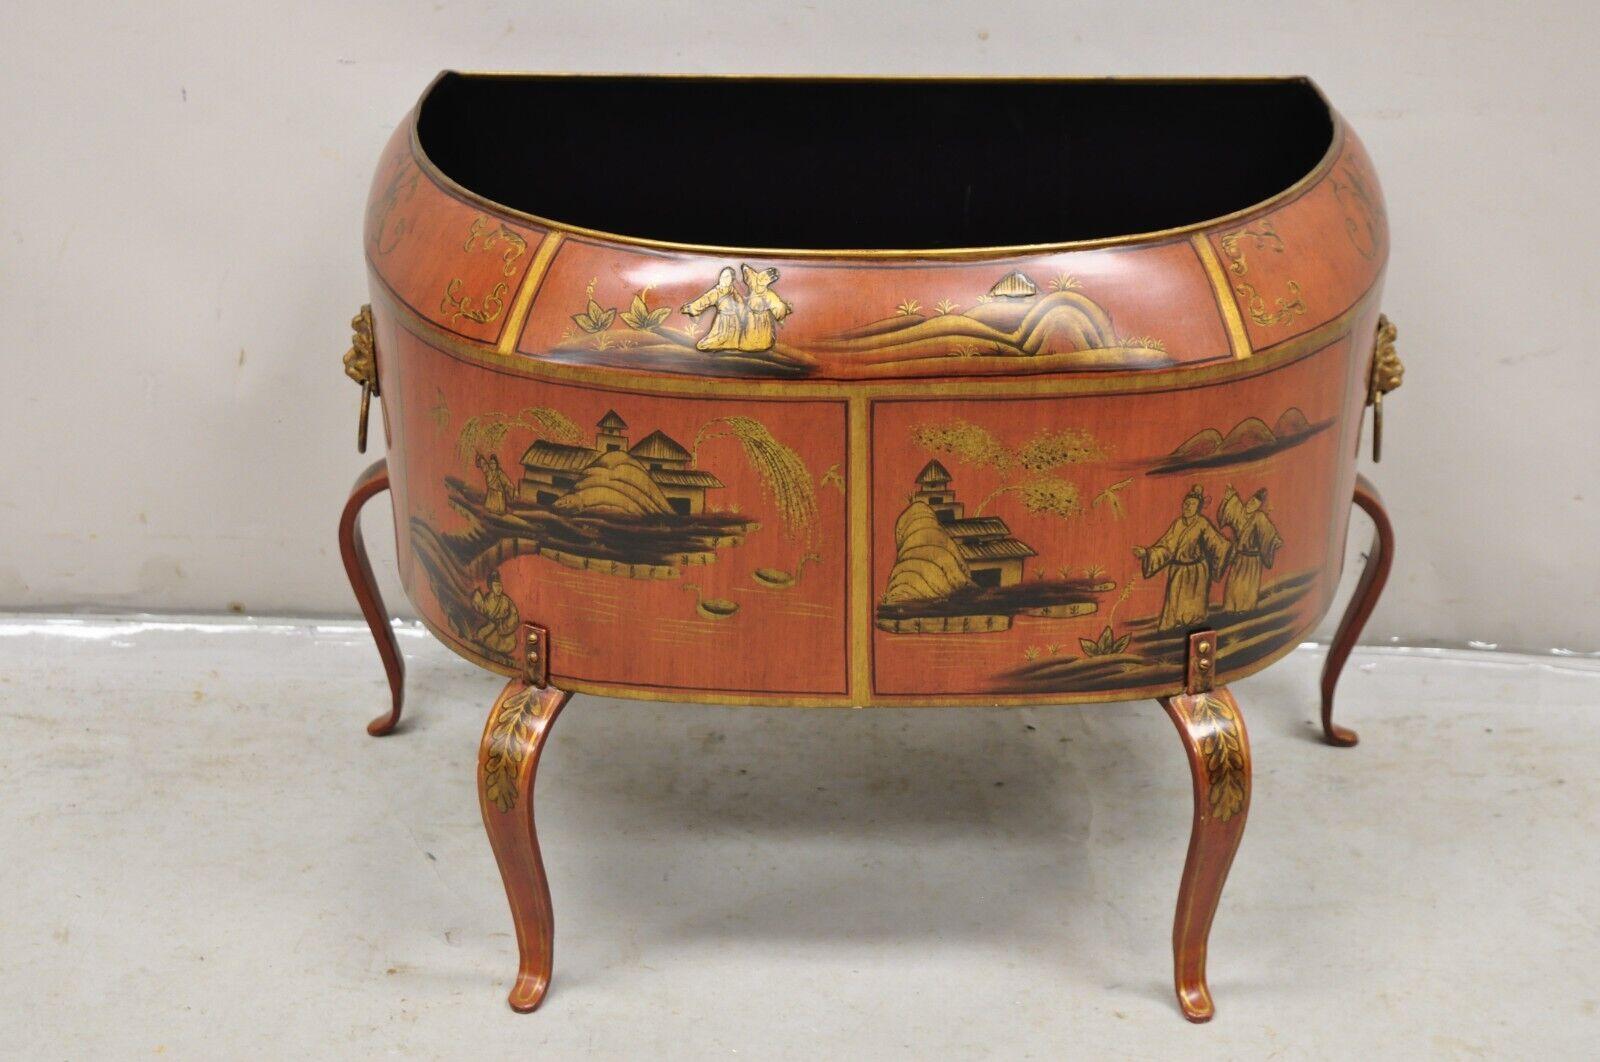 Italian Red Tole Chinoiserie Gilt Decorated Floor Jardiniere Planter For Sale 6